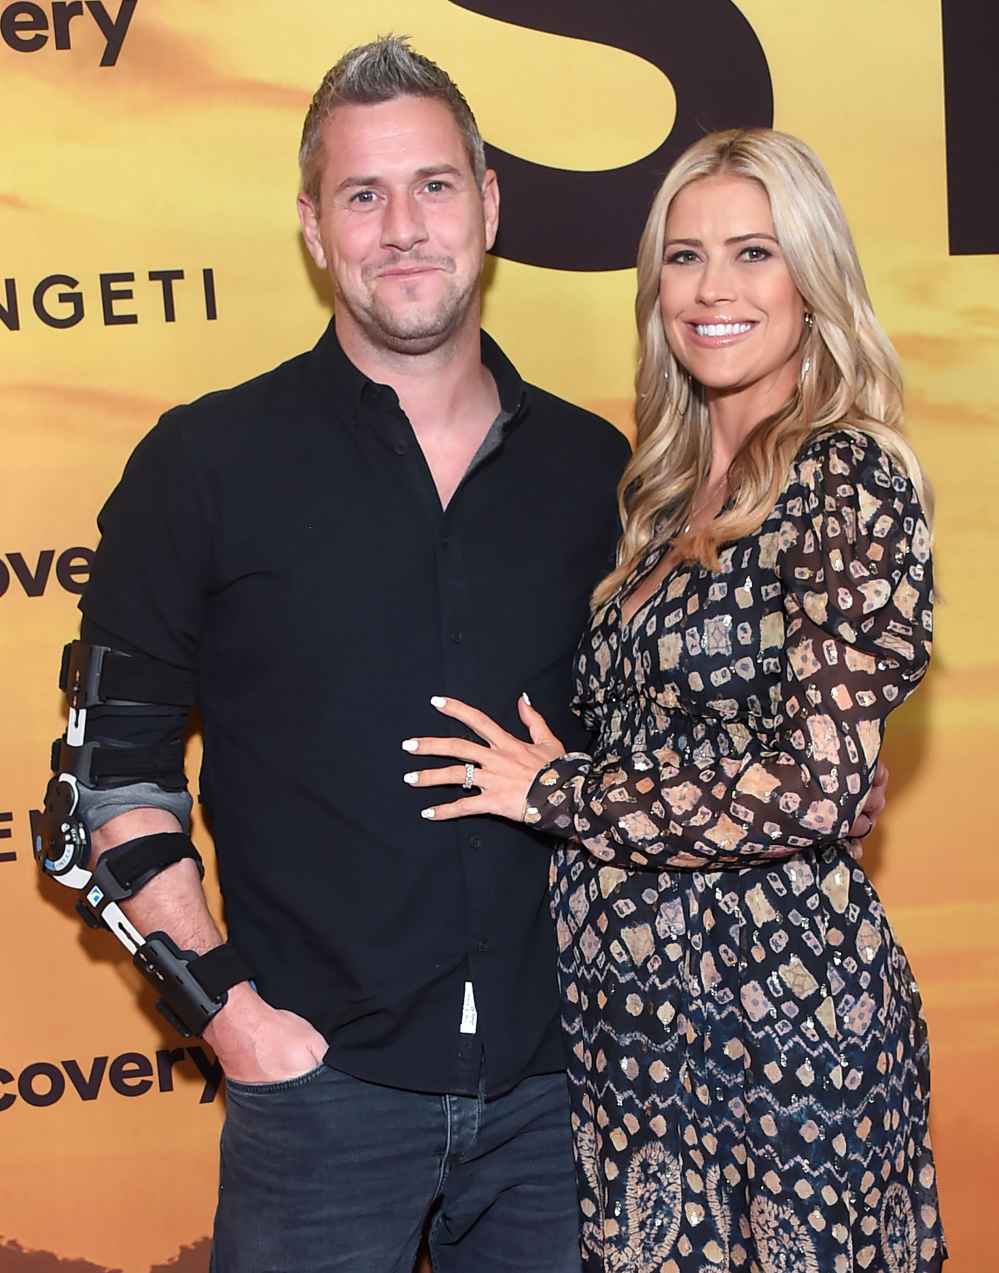 Christina Anstead Slams Claims She’s an ‘Absent Mother’ to Kids Amid Divorce